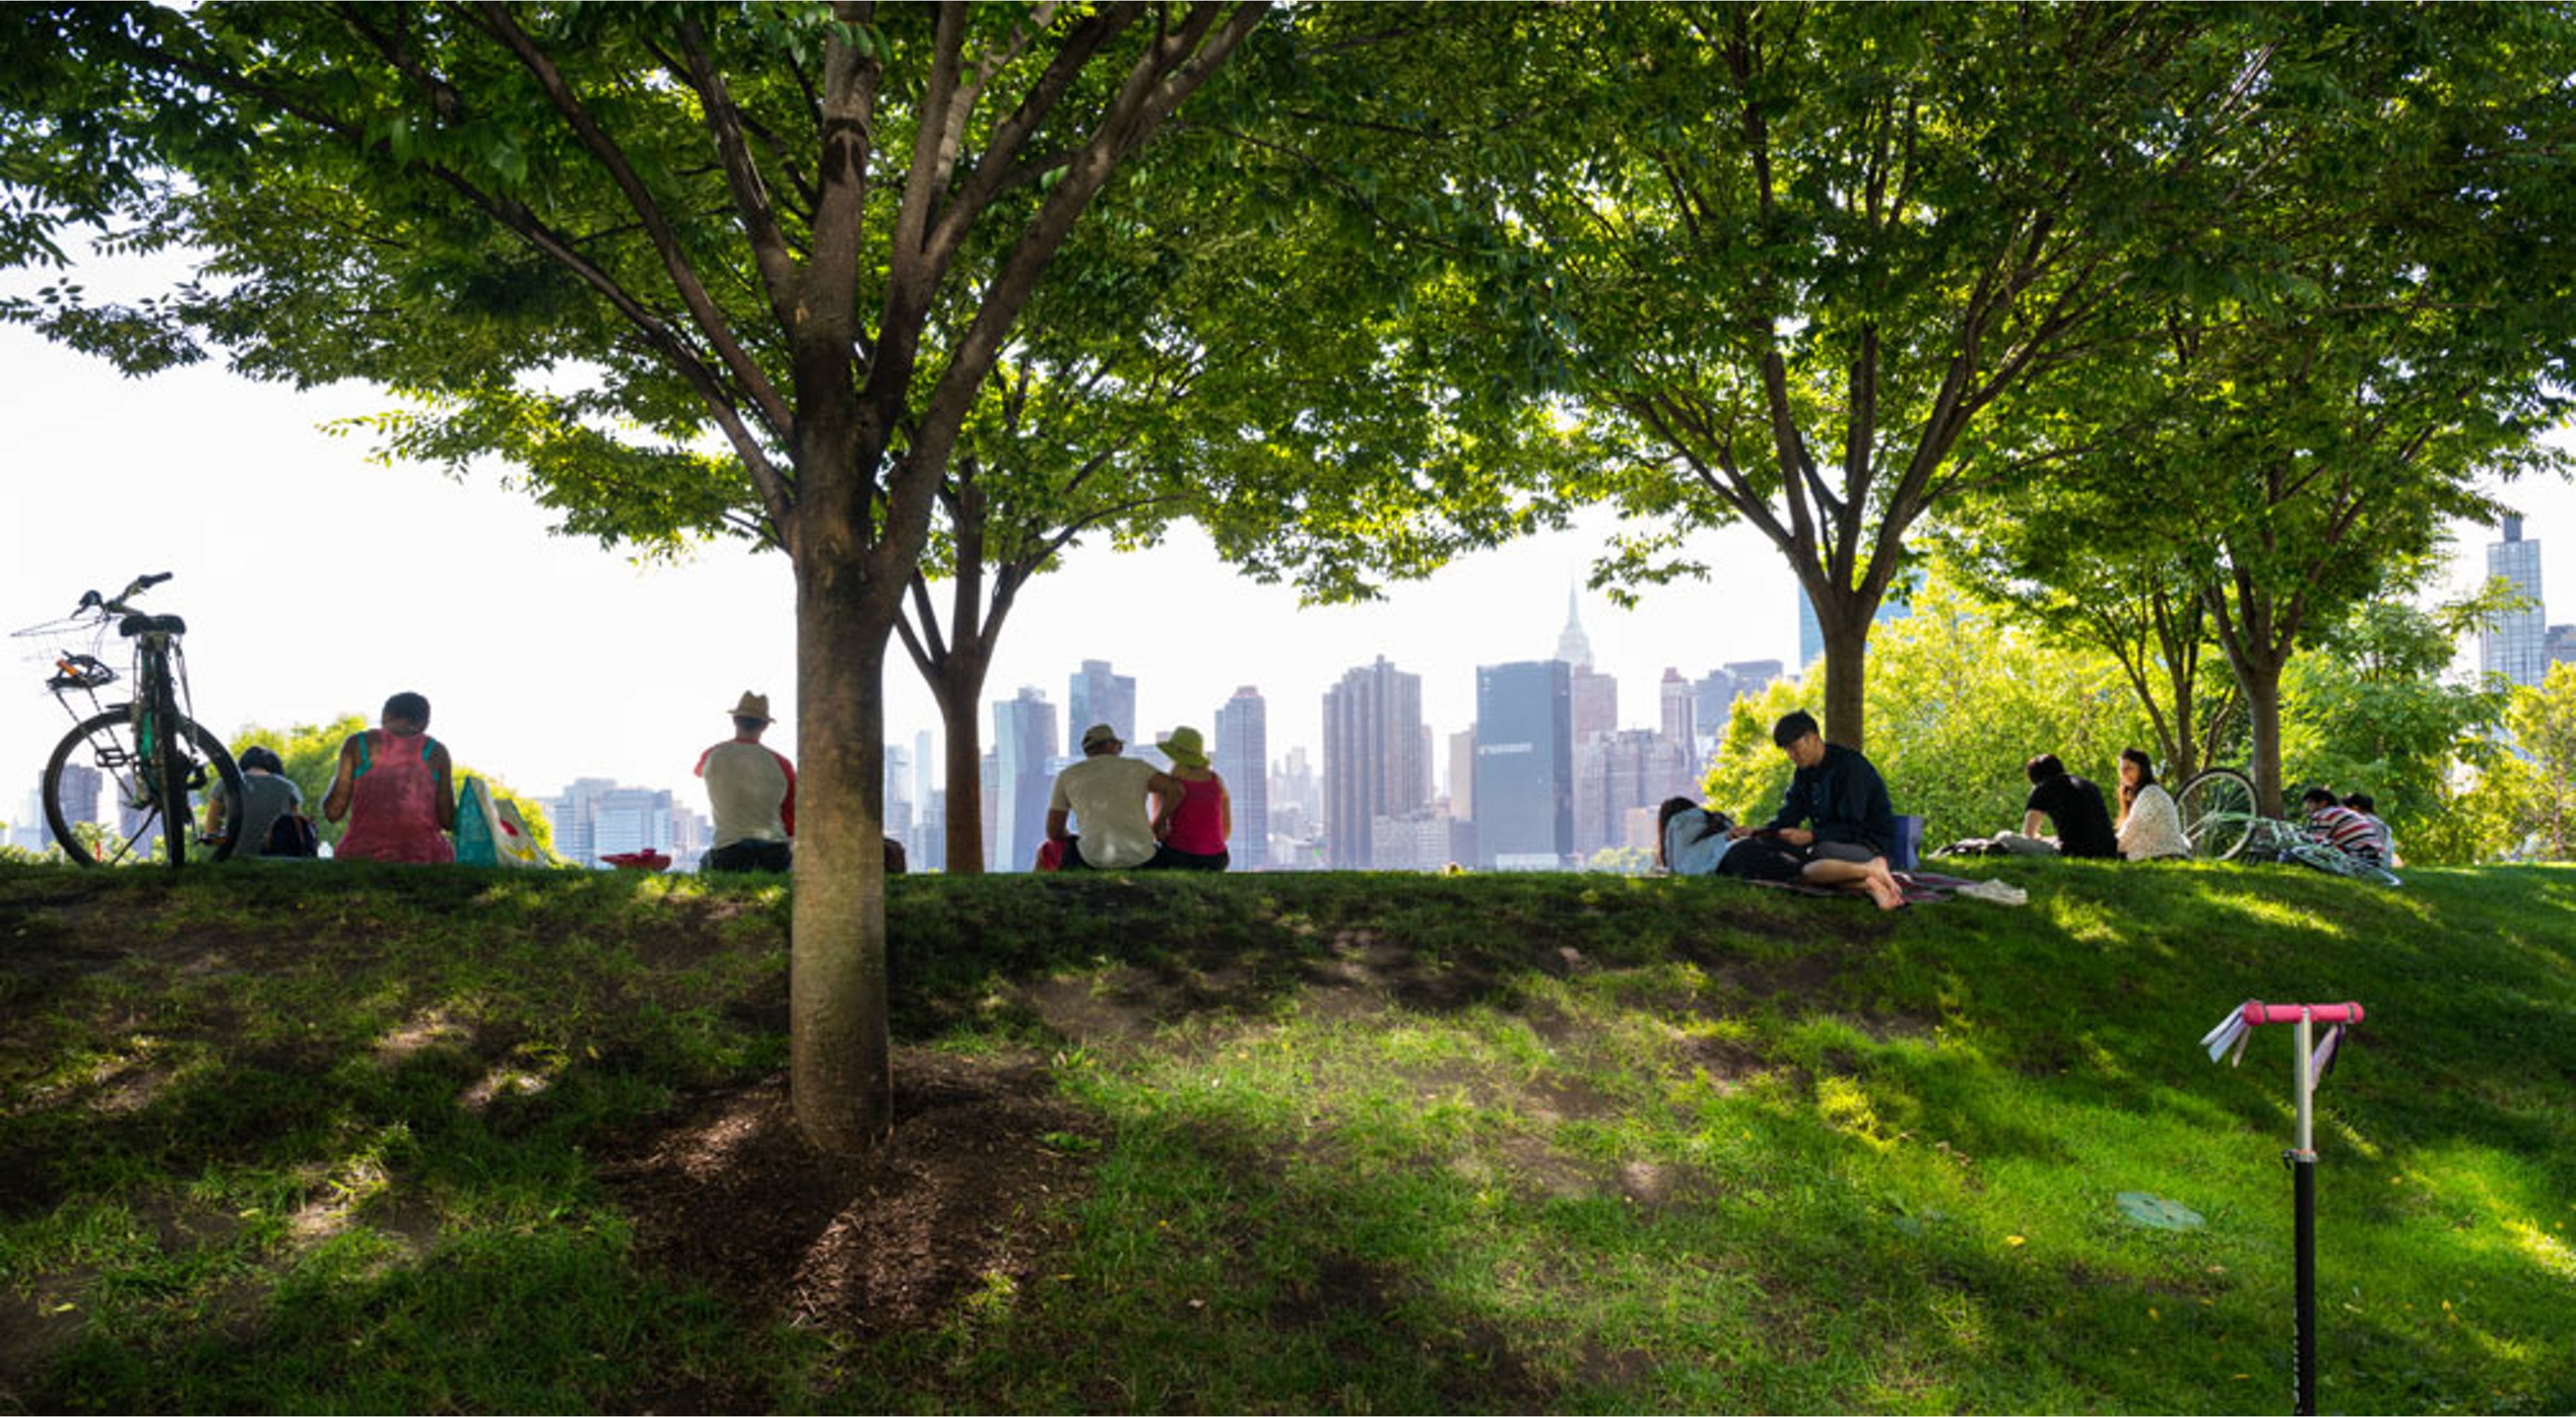 Several people sit on a grassy hill under the shade of large trees. The New York City skyline is in the distance.